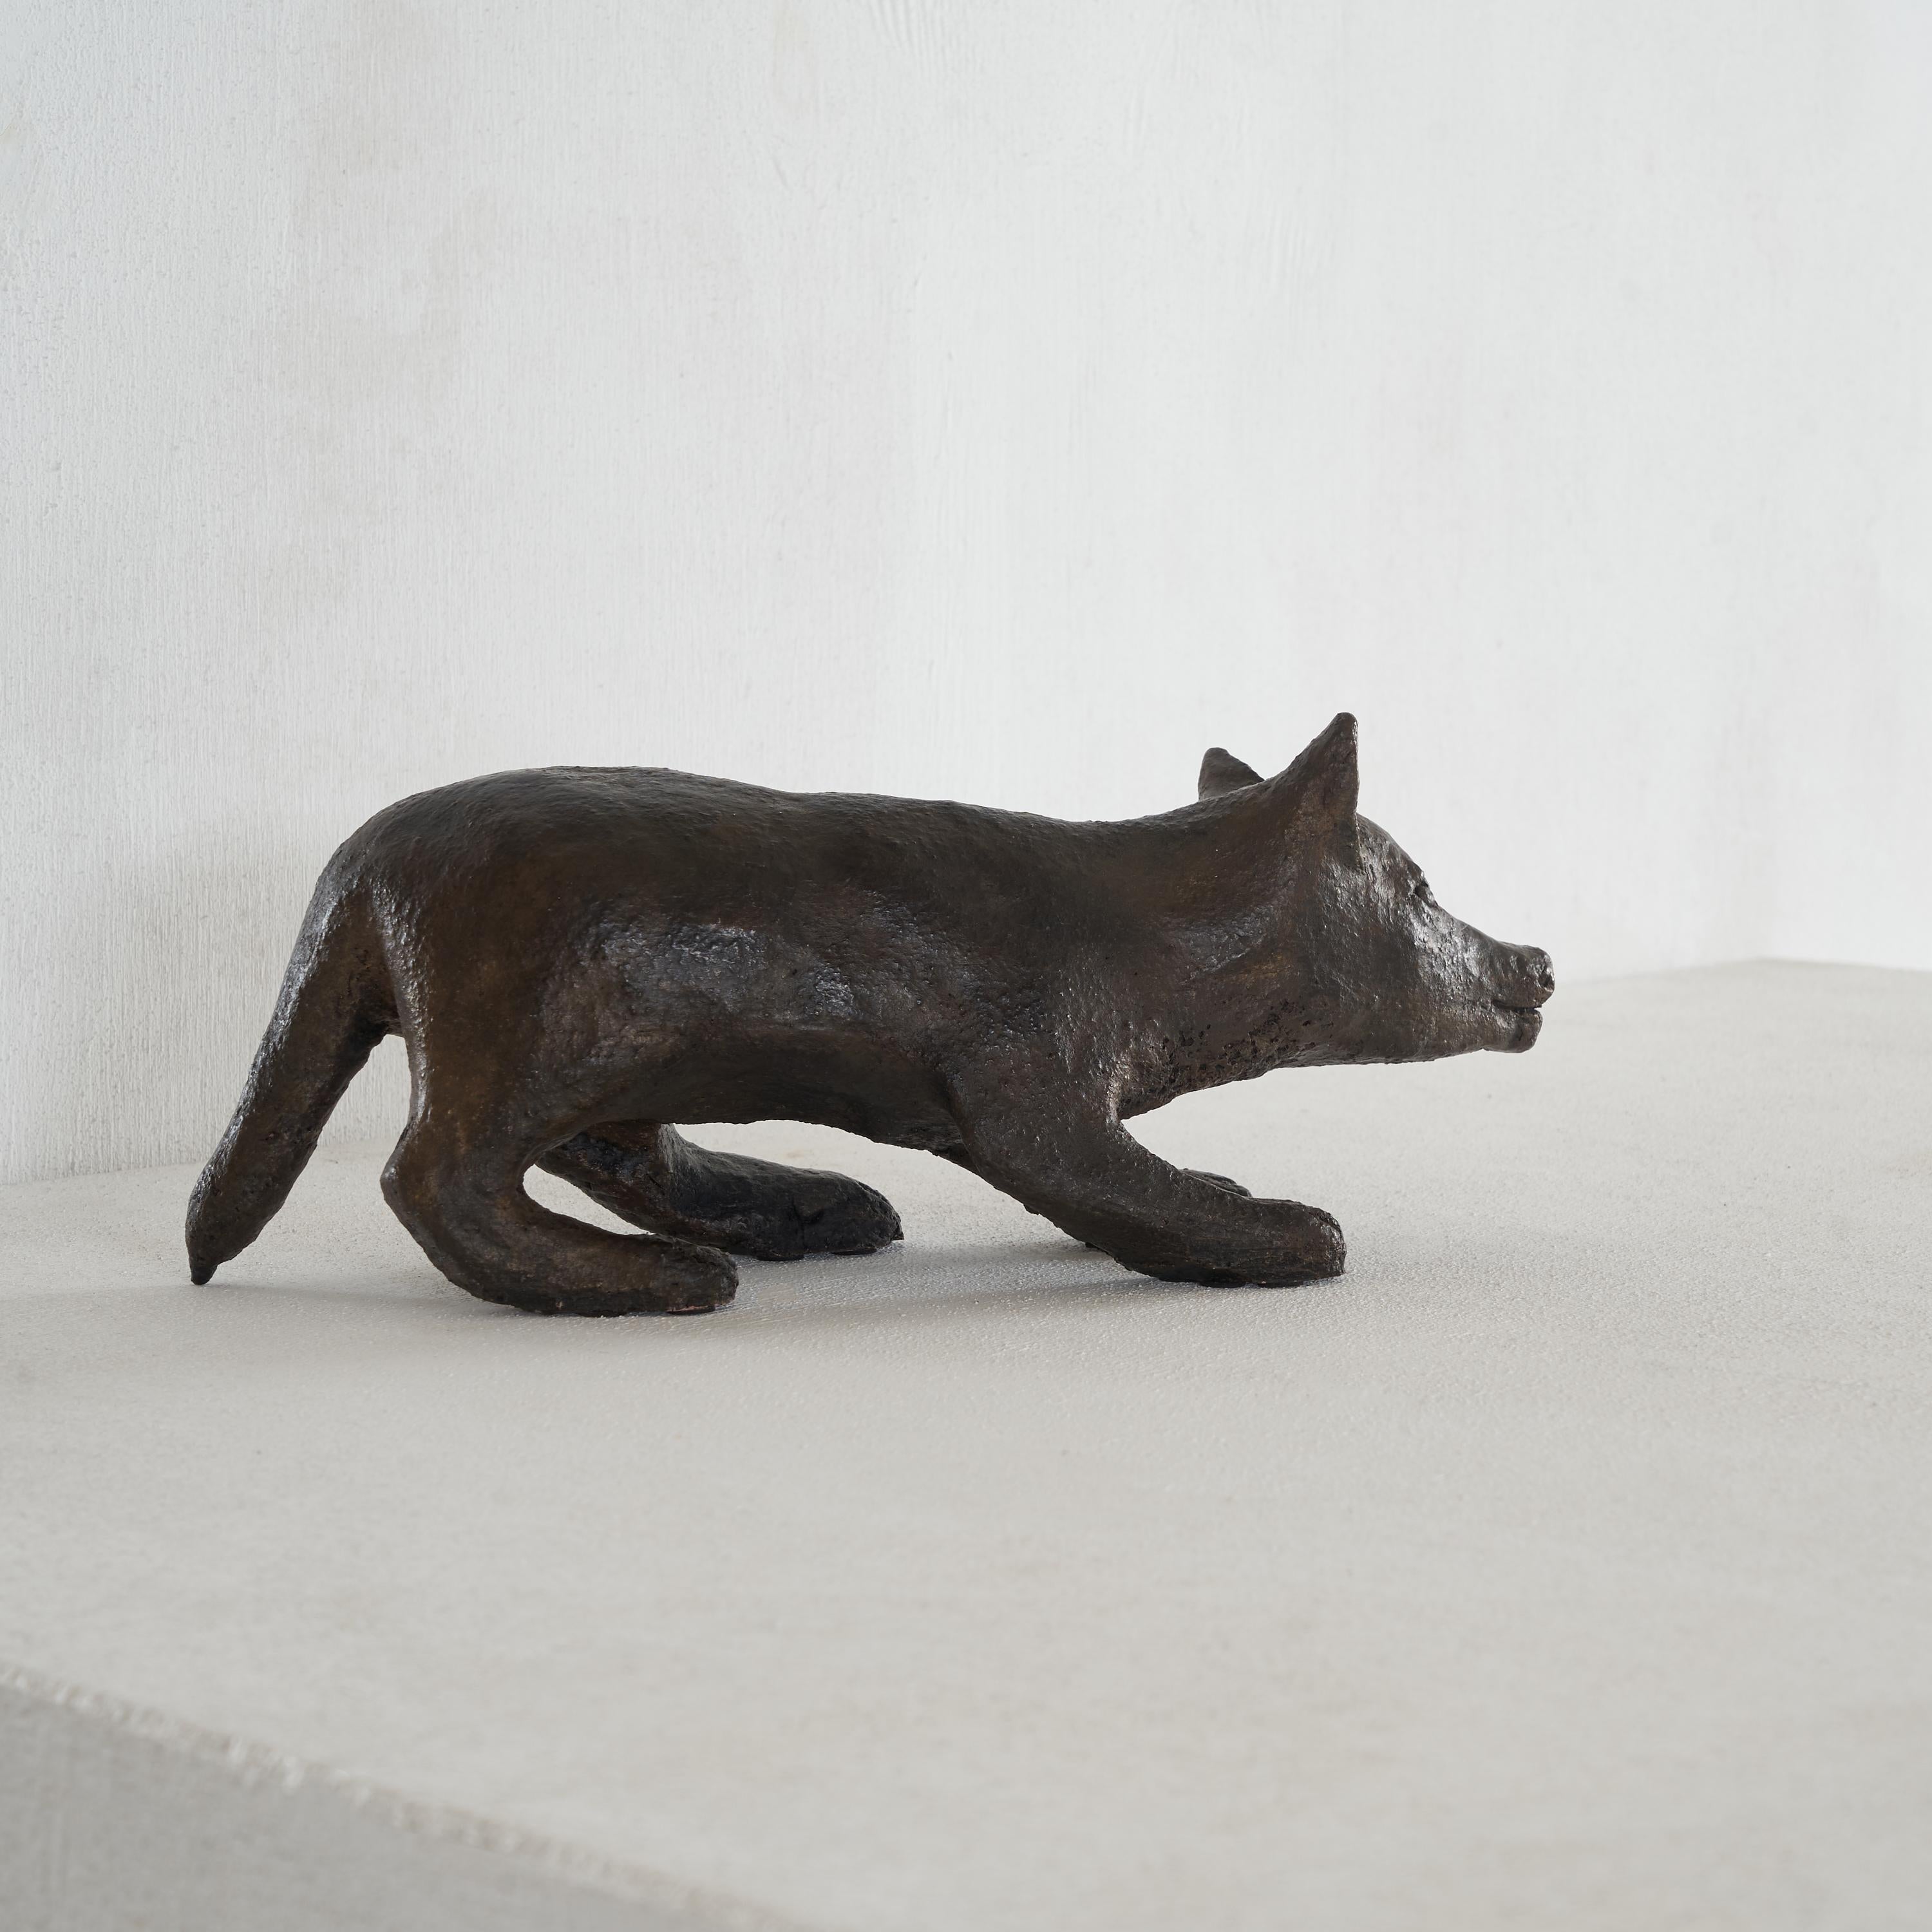 Fantastic sculpted dog in patinated clay. This dog looks great and has great presence. The sculptor captured the movement and position of a dog ready to strike perfectly. This makes it a very dynamic work that convinces from every angle.

Bronze